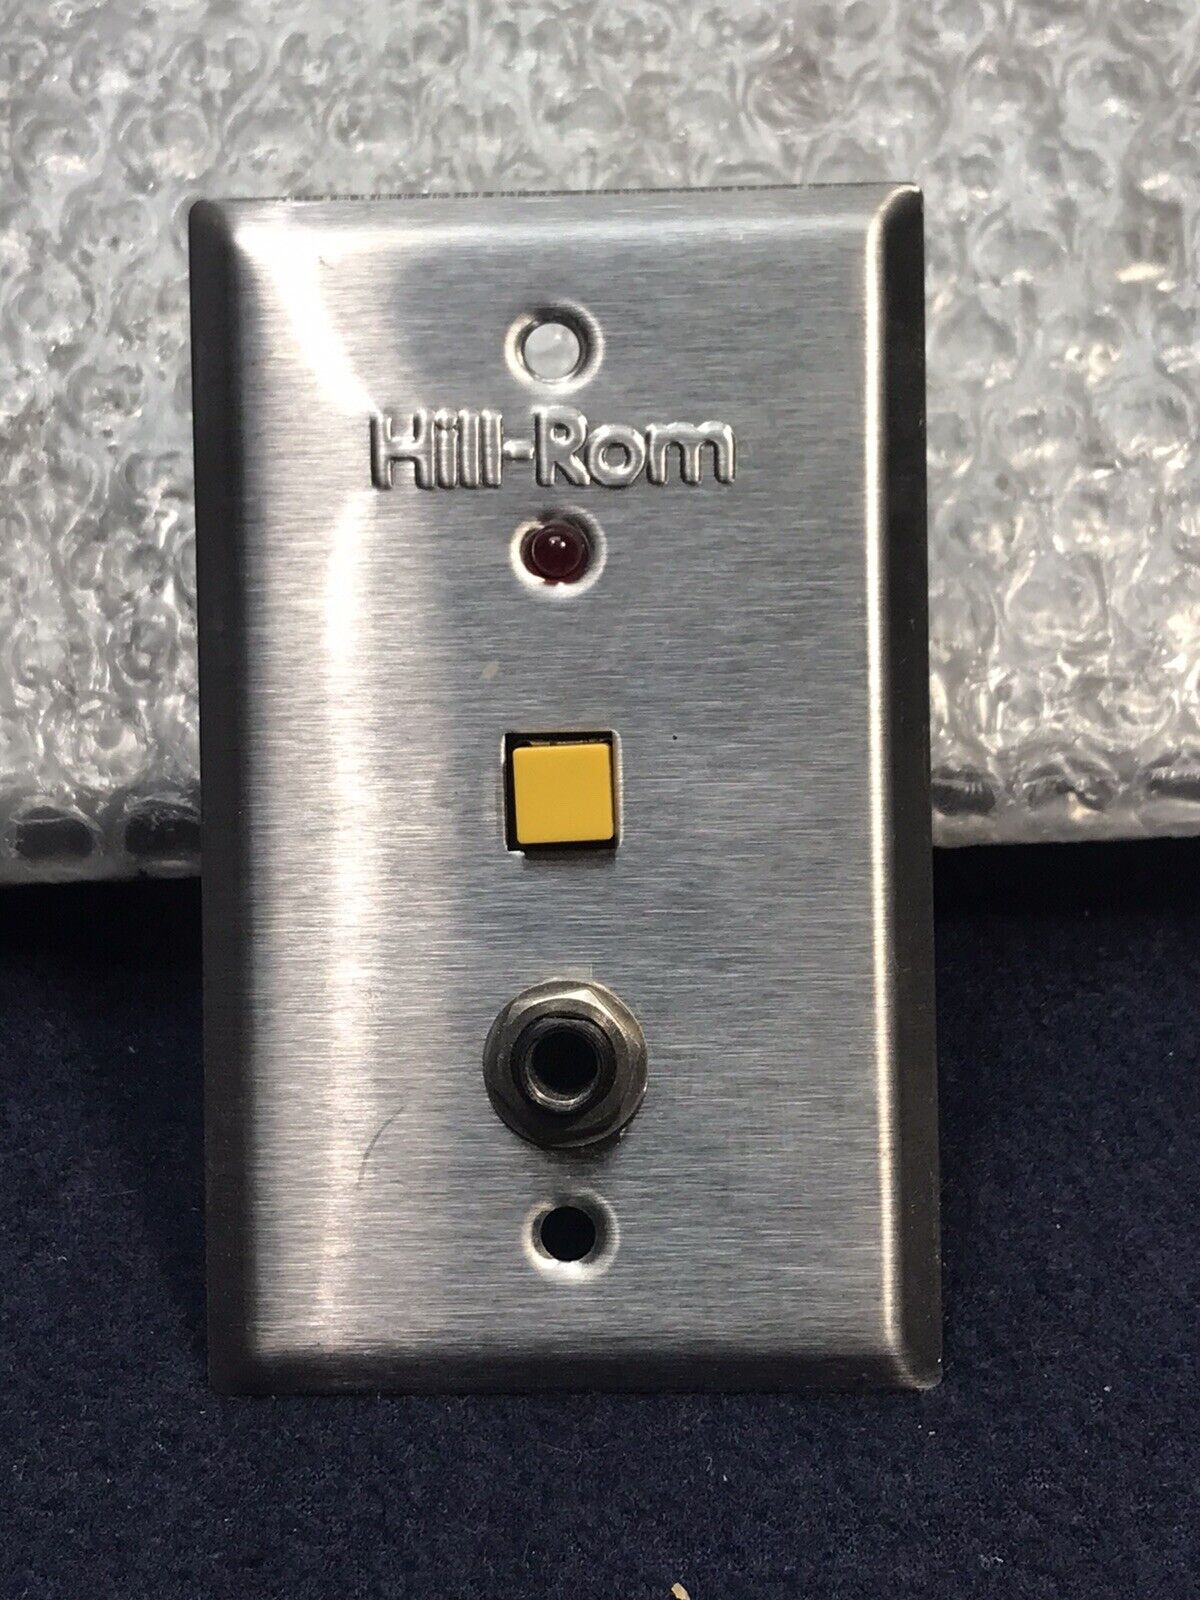 Hill-rom P2516a01 Nurse Call Button With Indicator Free Shipping